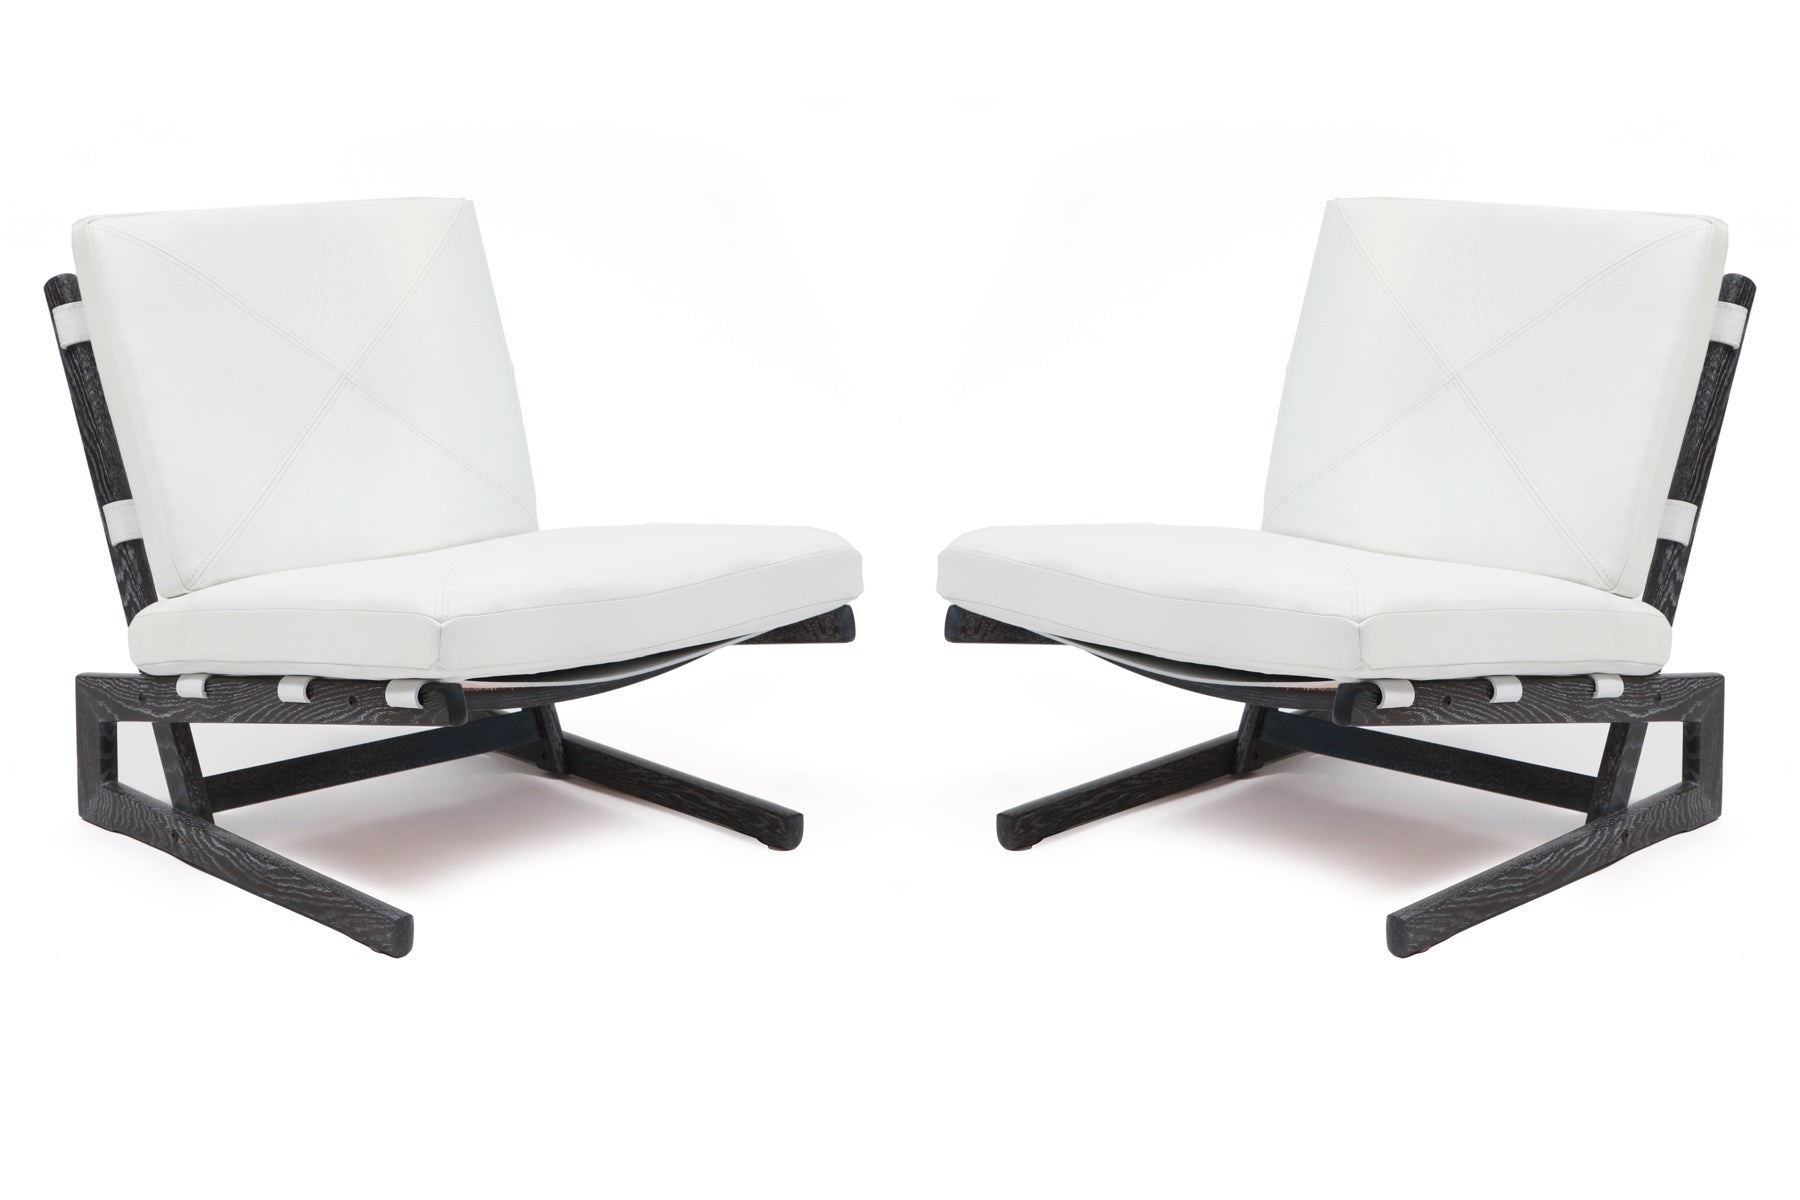 Pair of Elegant White Leather and Gray Cerused Oak Lounge Chairs